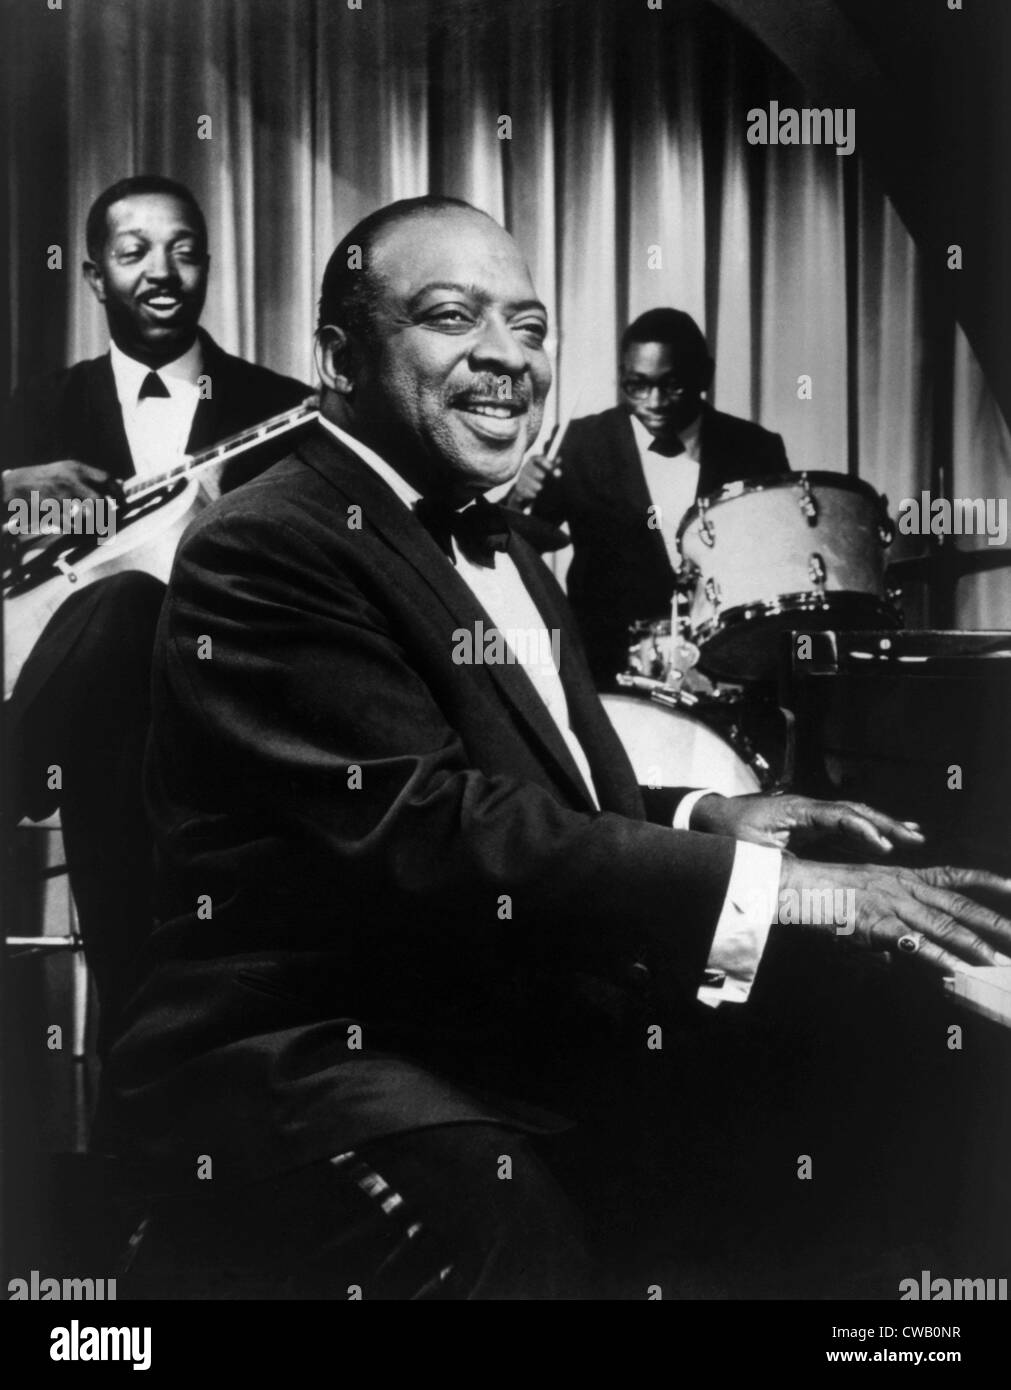 MADE IN PARIS, Count Basie, 1966 Stock Photo